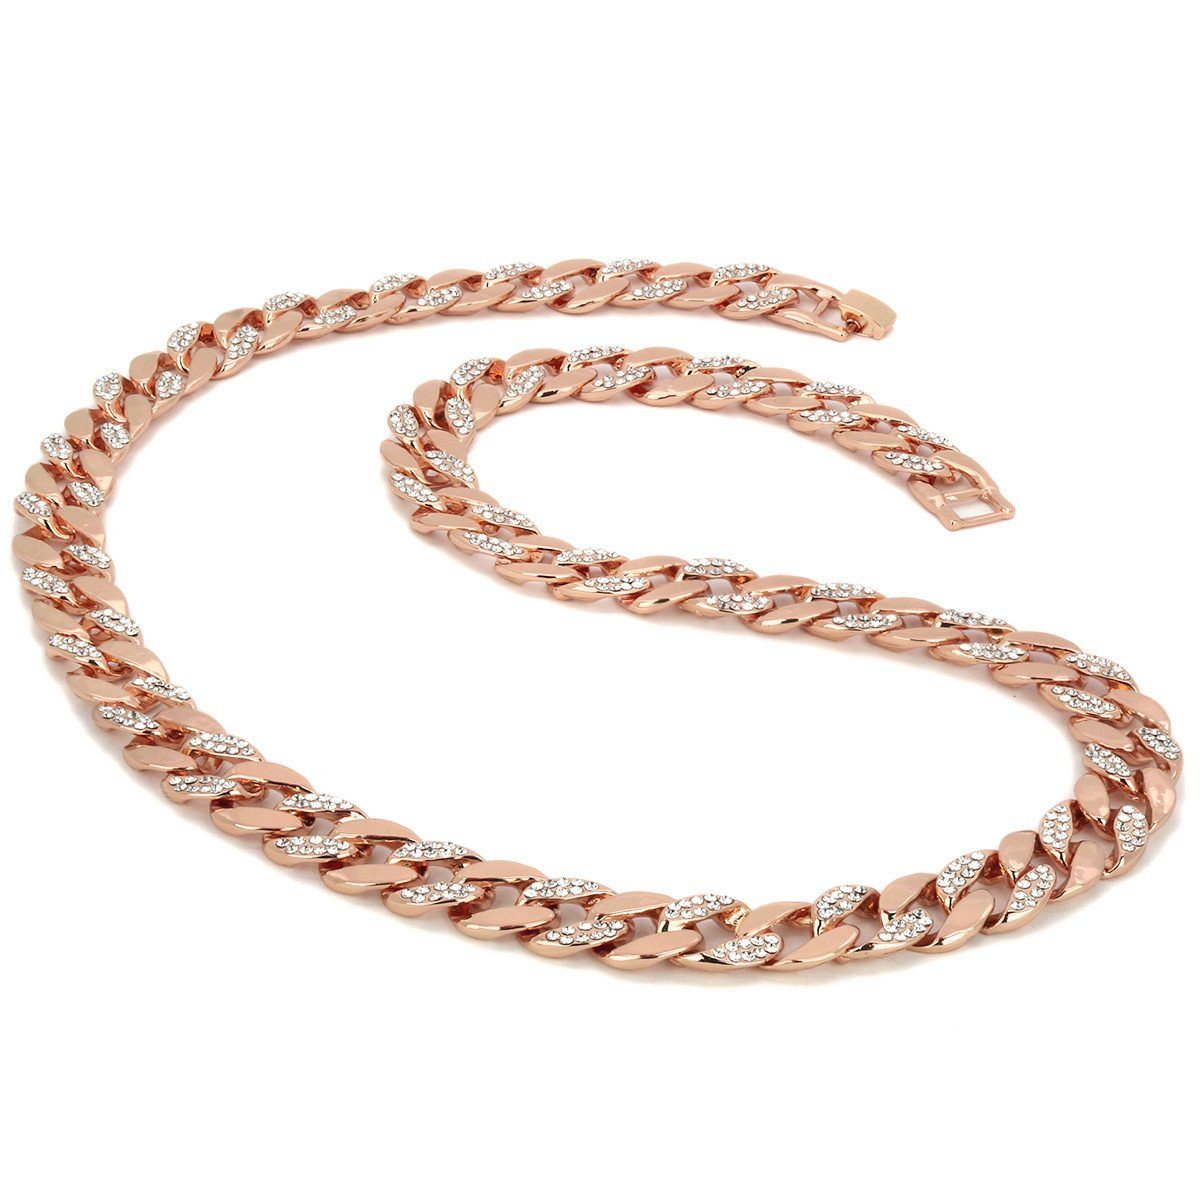 Rose Gold Plated Cuban Half Cz Chain Necklace 15mm 30" Inches